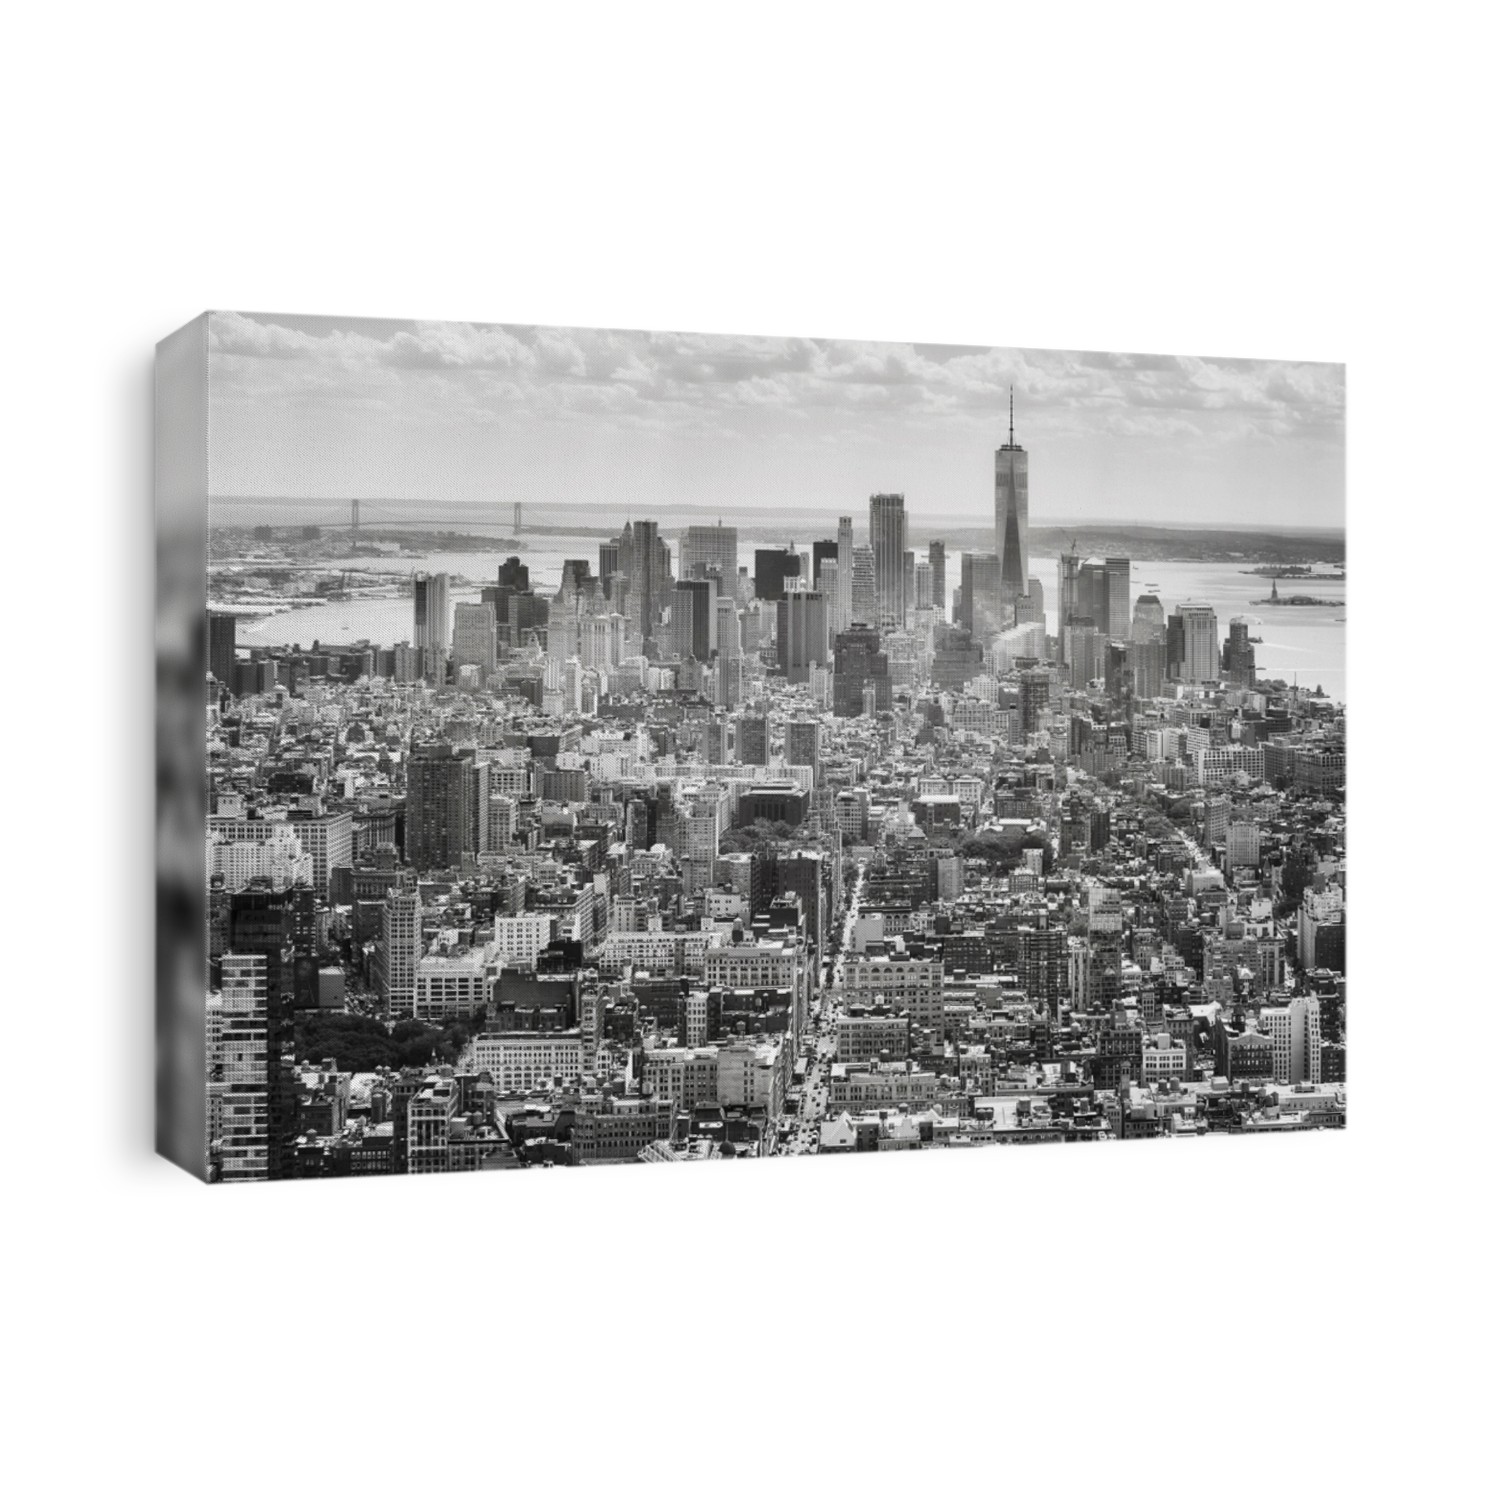 Black and white picture of the New York City skyline, USA.